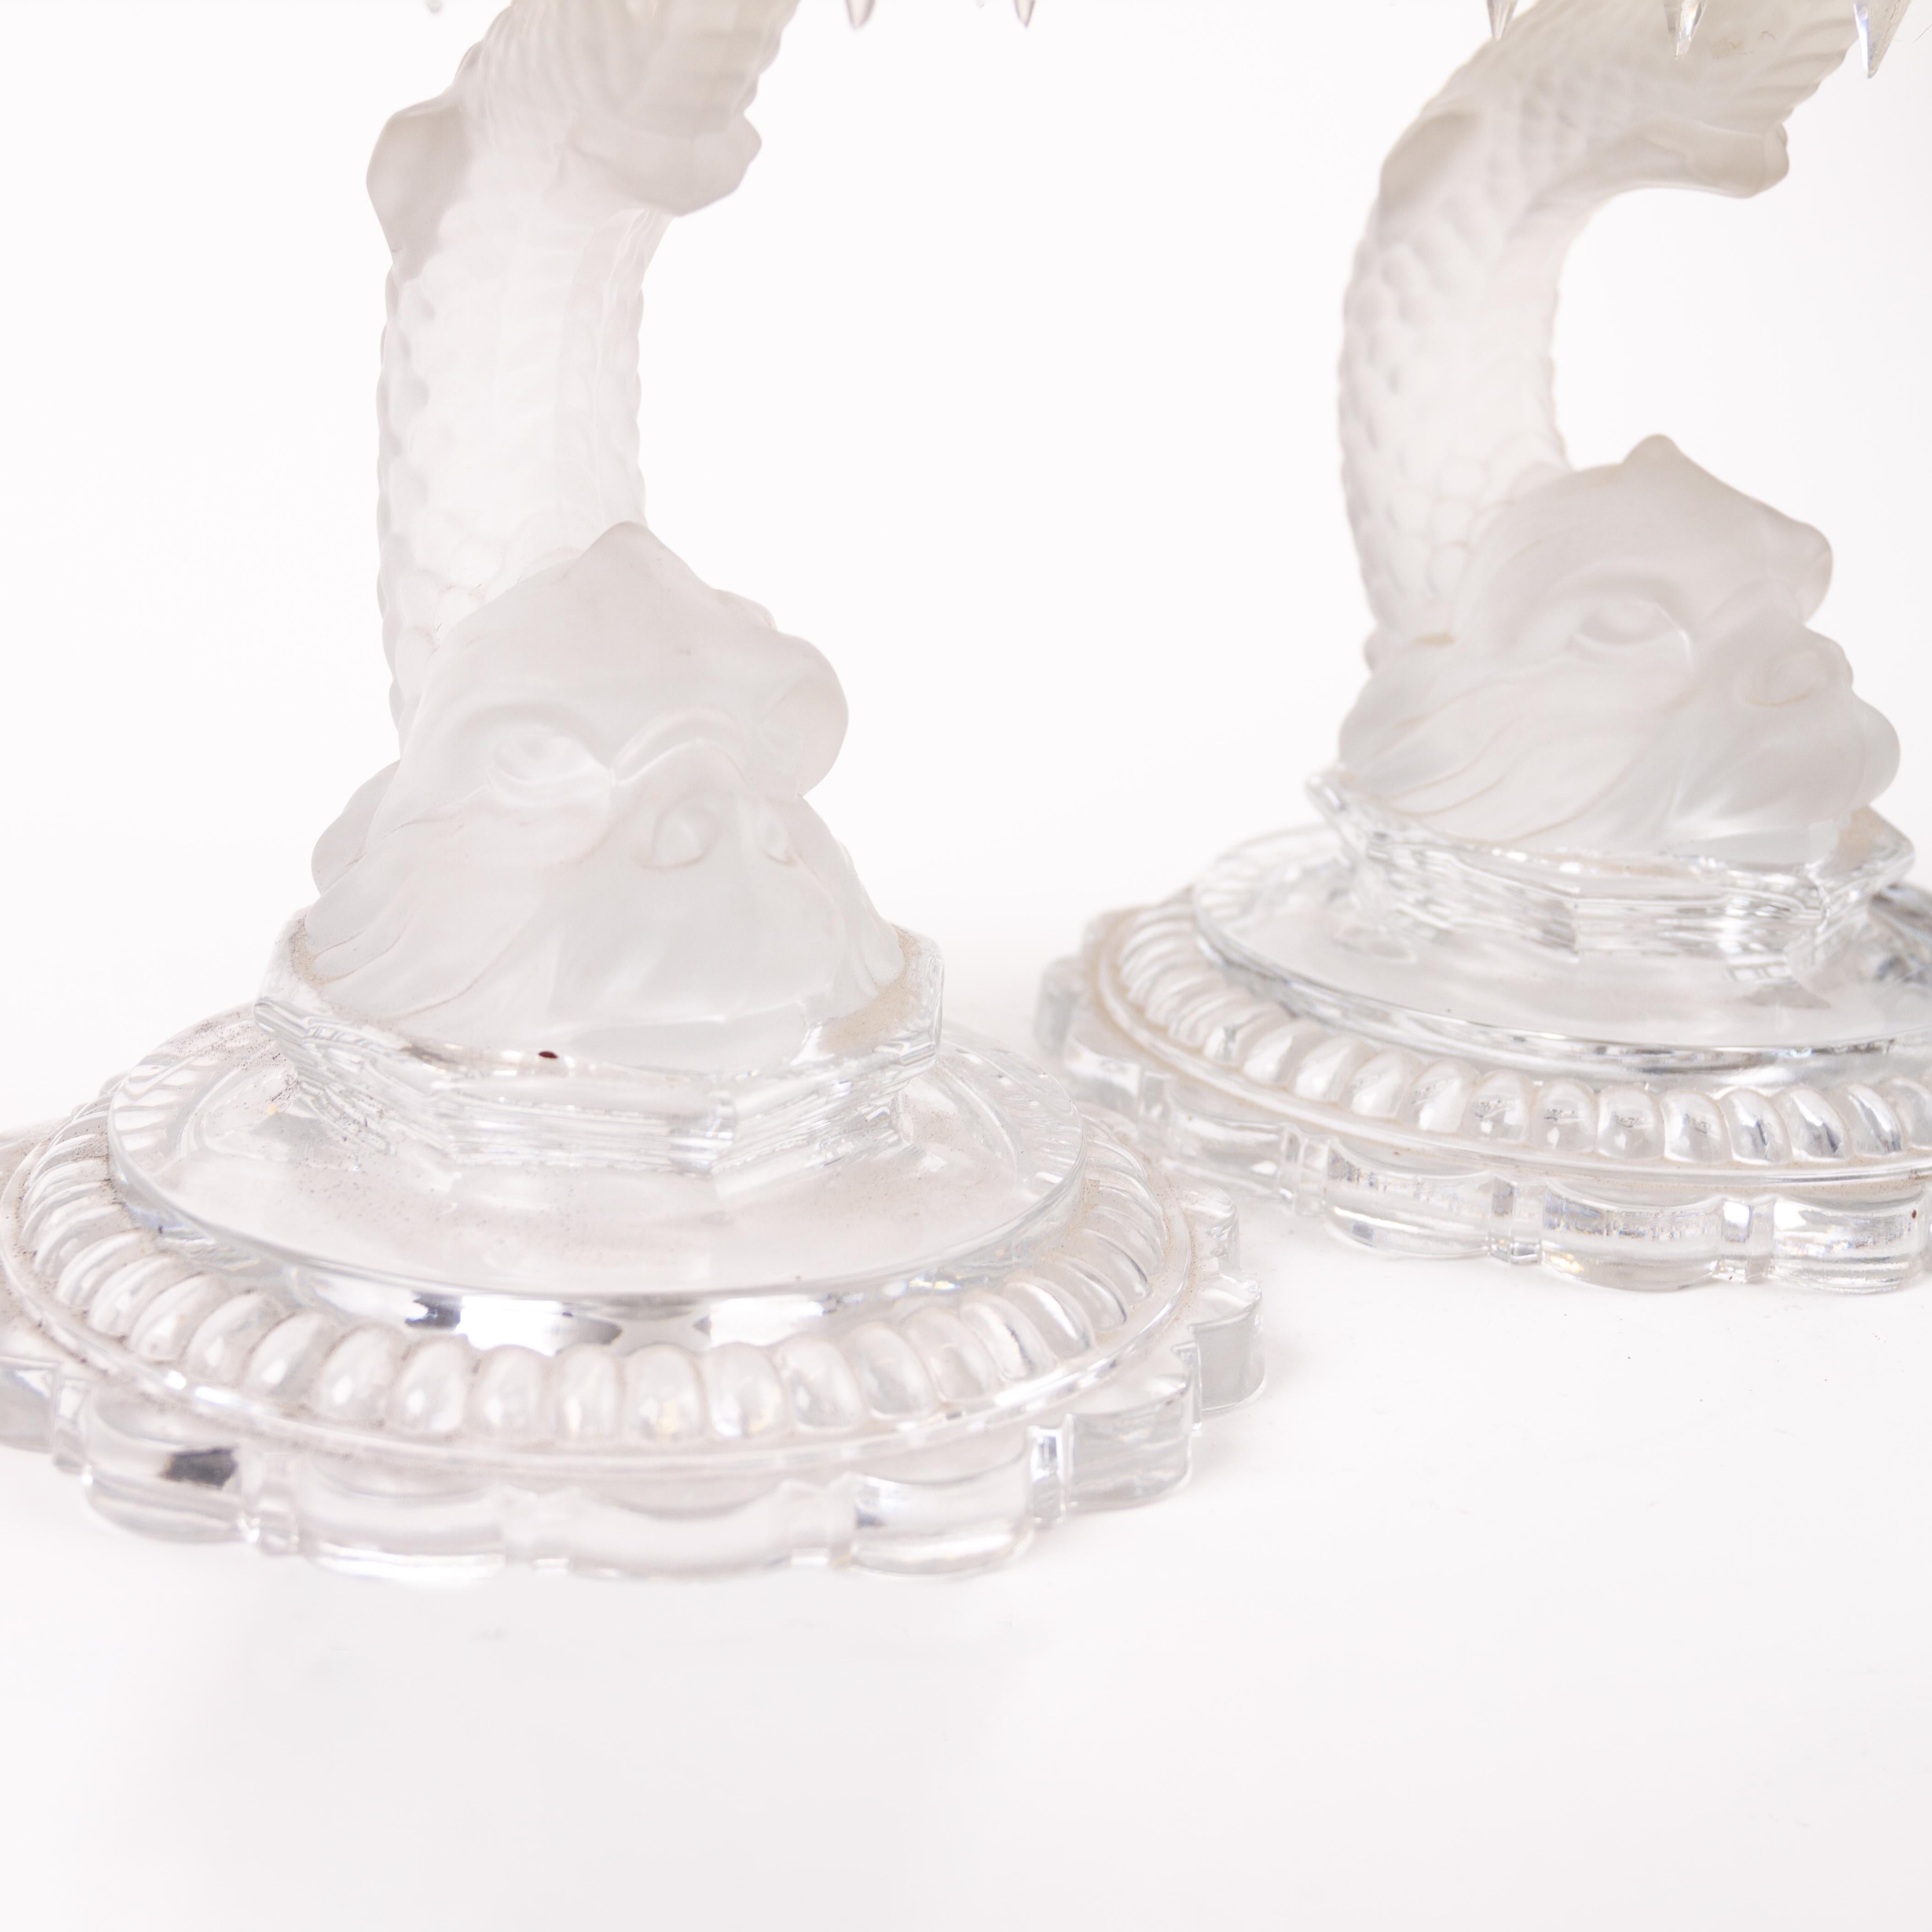 Pair of Baccarat Crystal Dolphin Candle Holders Early 20th Century For Sale 5